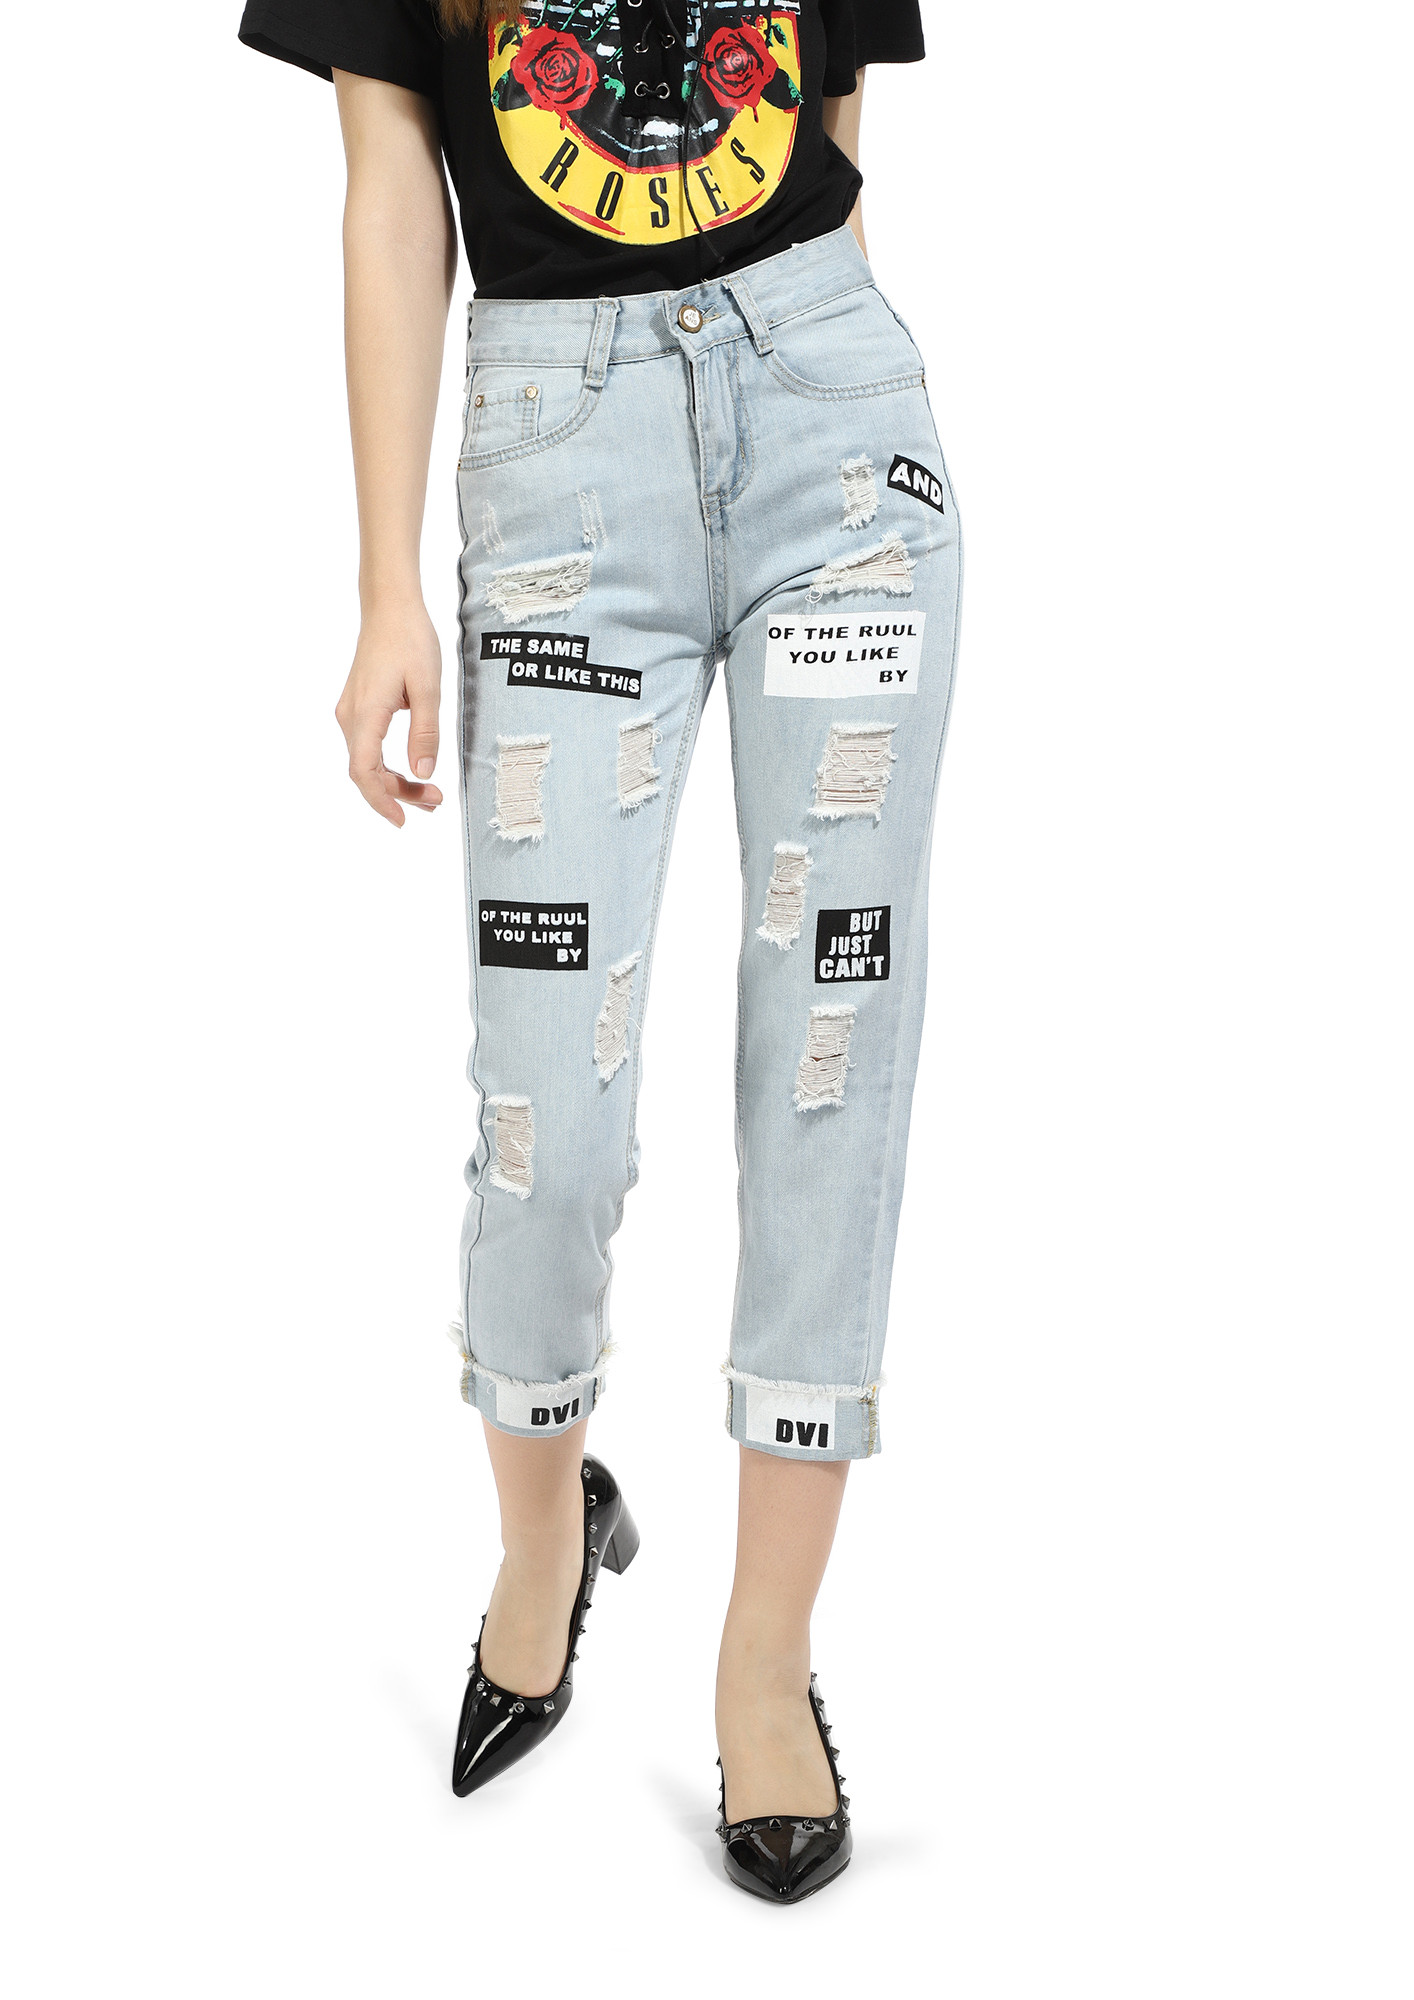 WORD UP LADIES LIGHT BLUE CROPPED JEANS